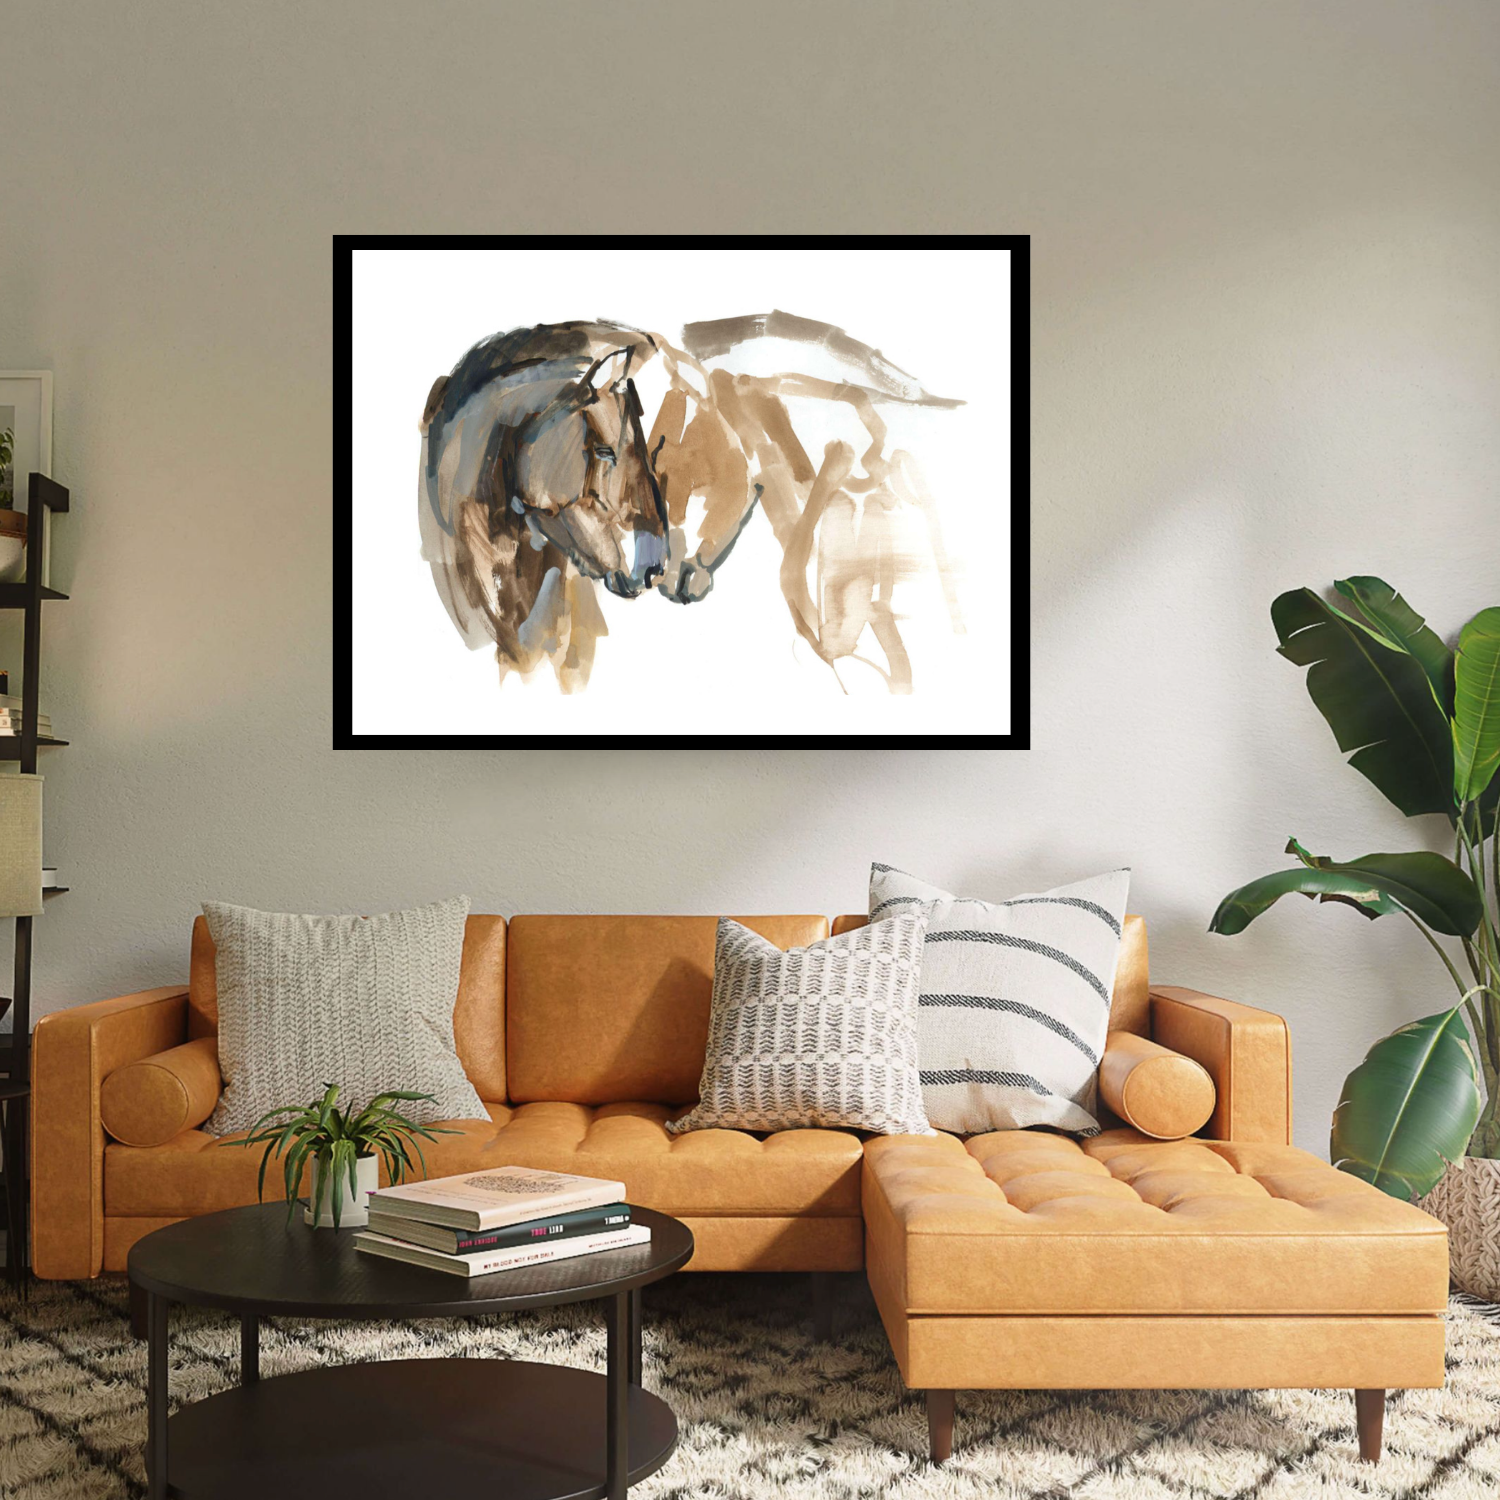 Experience the emotion in Mark Adlington's 'Nose to Nose.' From his Przewalski Horses series, this black framed artwork depicts a touching moment between majestic animals. Available as fine art prints, it's a captivating addition to any collection.